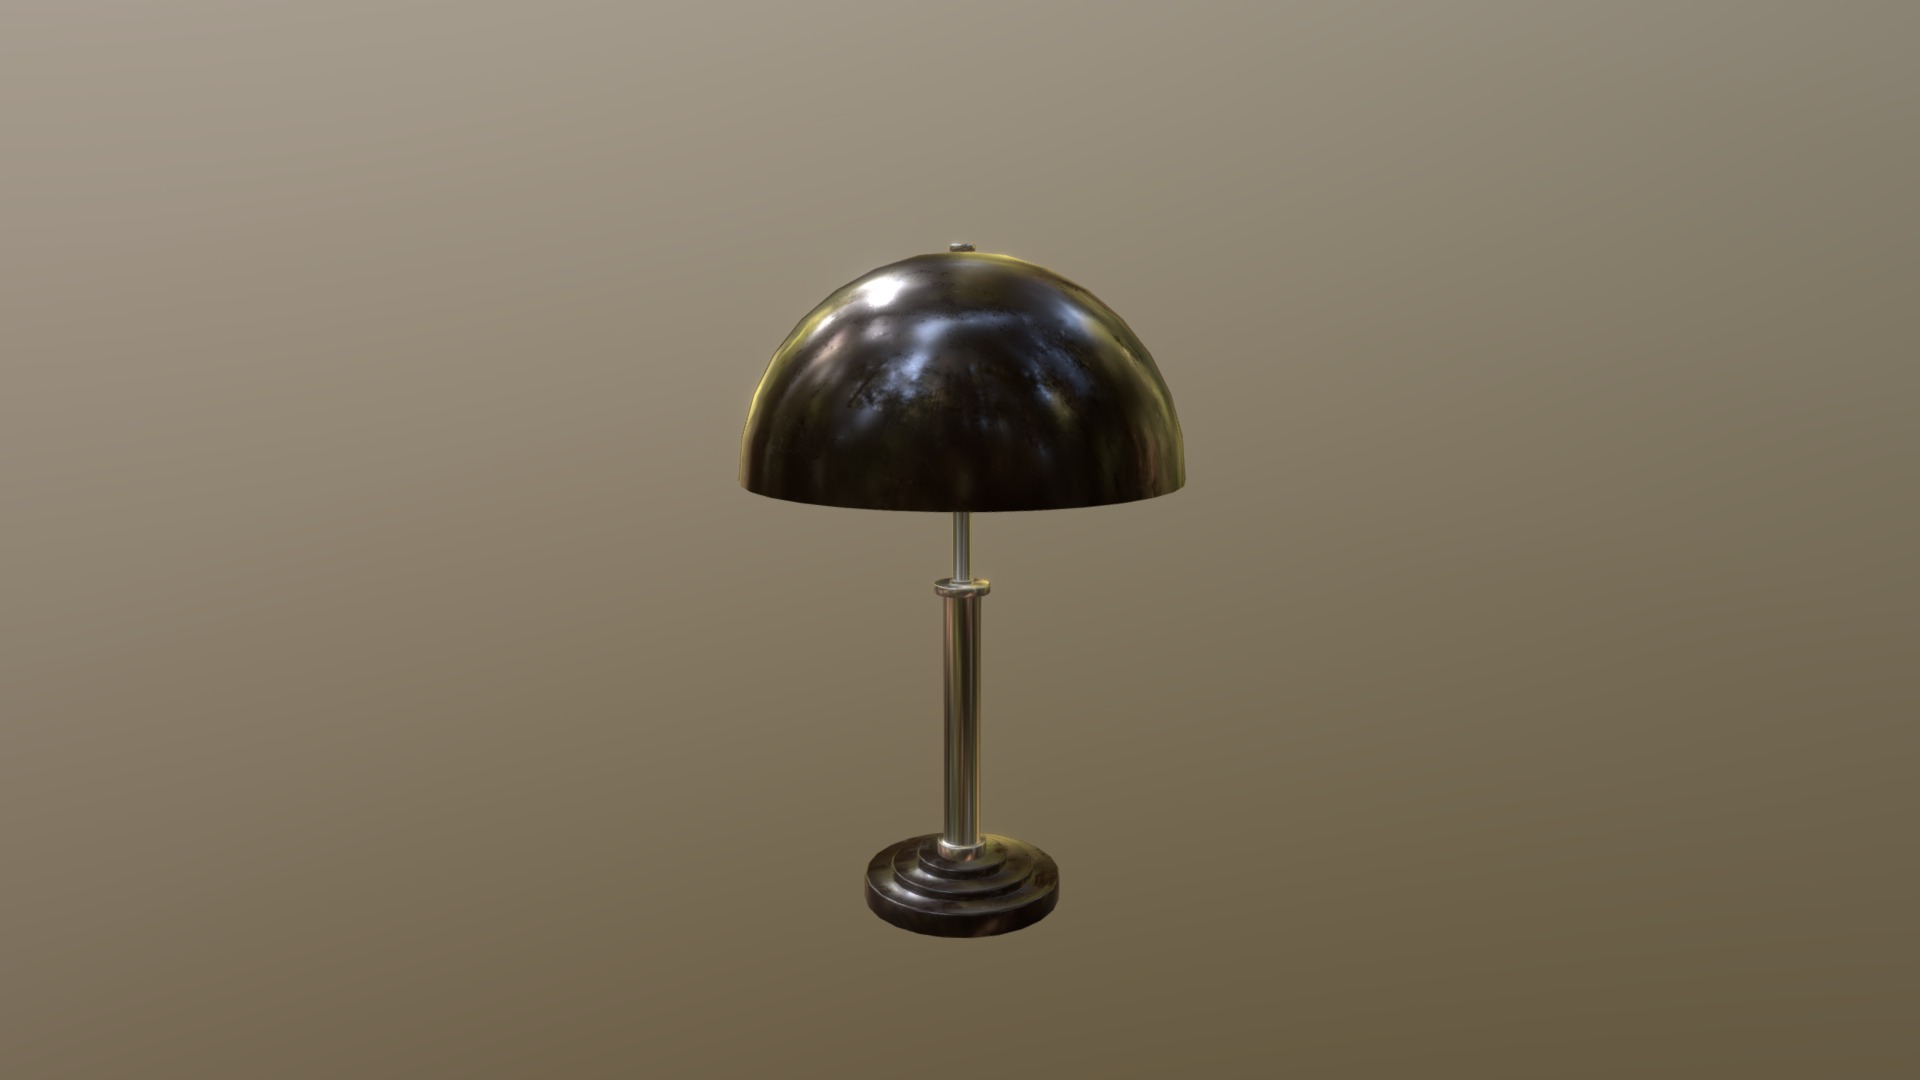 3D model Lamp 11 - This is a 3D model of the Lamp 11. The 3D model is about a light bulb on a stand.